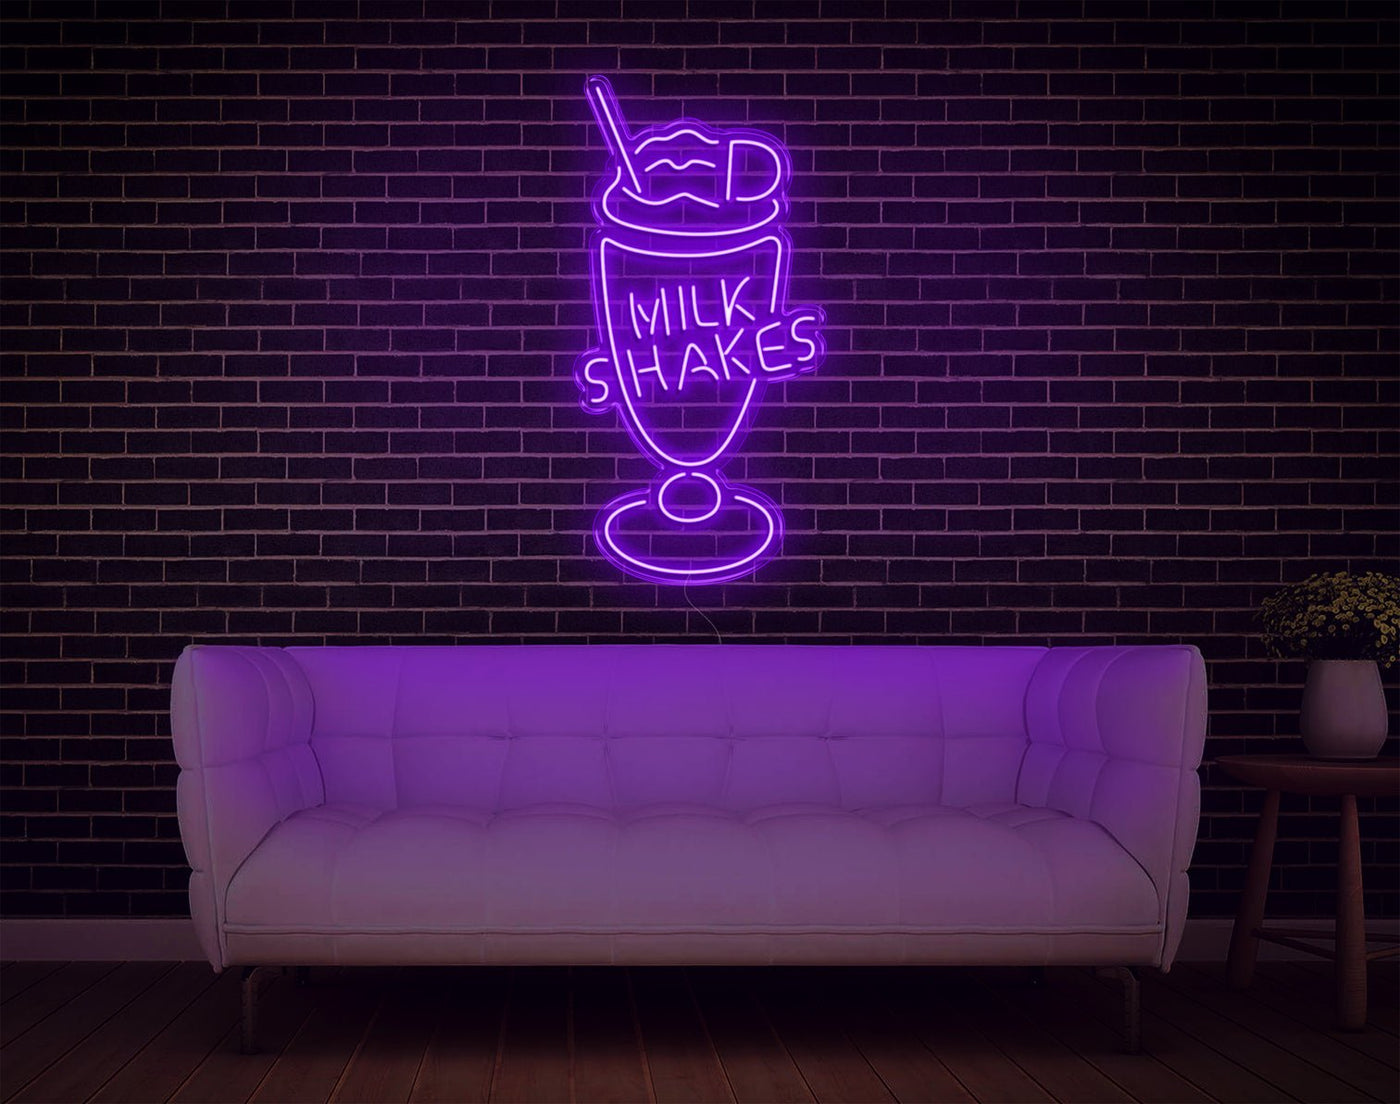 Milk Shakes LED Neon Sign - 37inch x 19inchHot Pink